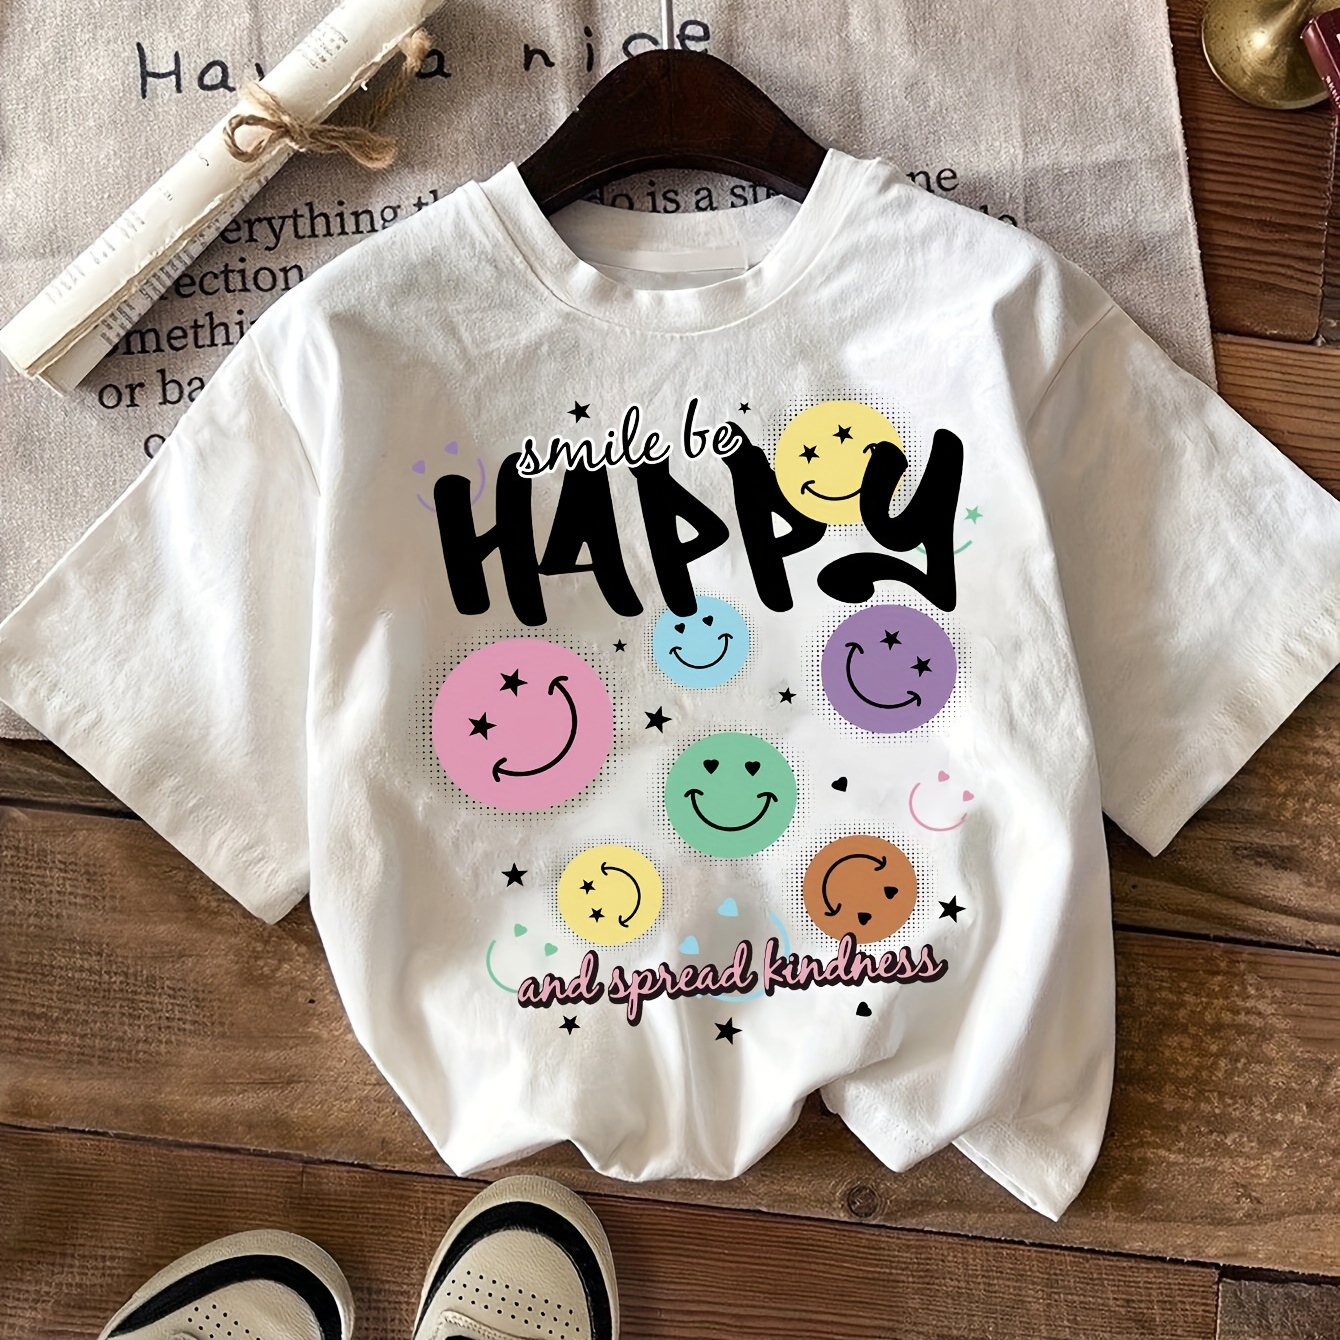 

Smile Face Print T-shirt, Short Sleeve Crew Neck Casual Top For Summer & Spring, Women's Clothing